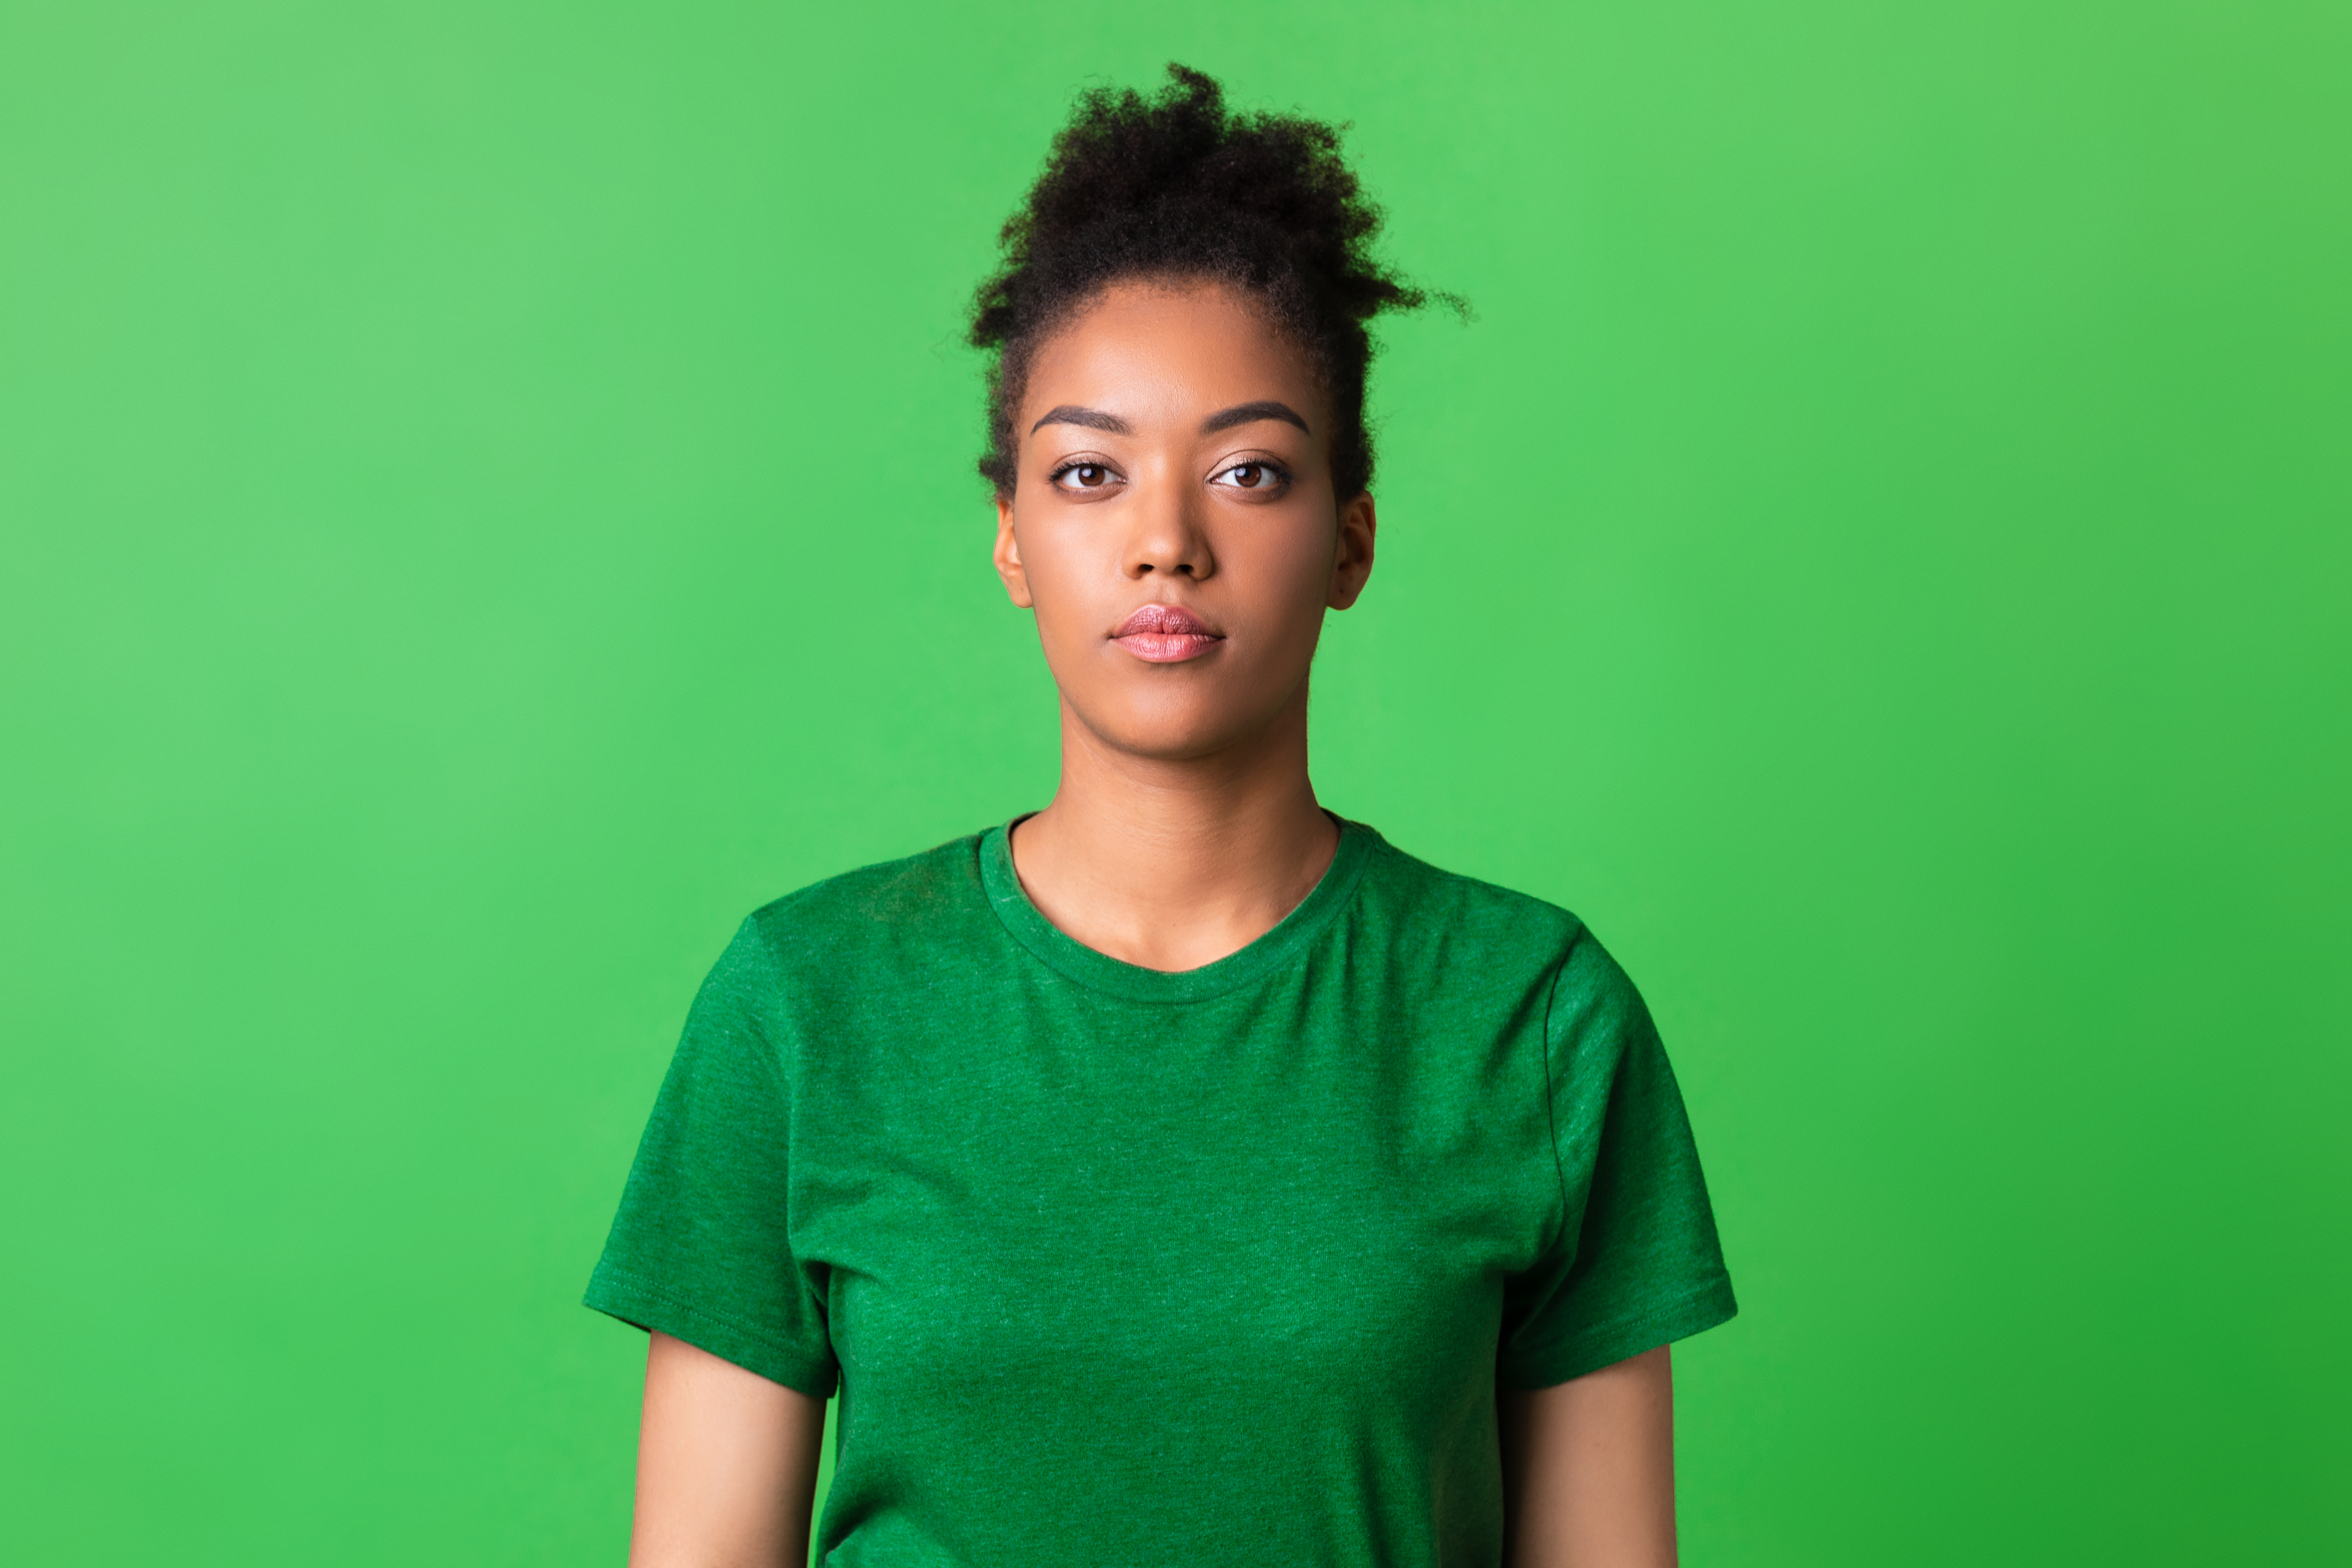 Unhappy woman wearing green with green background